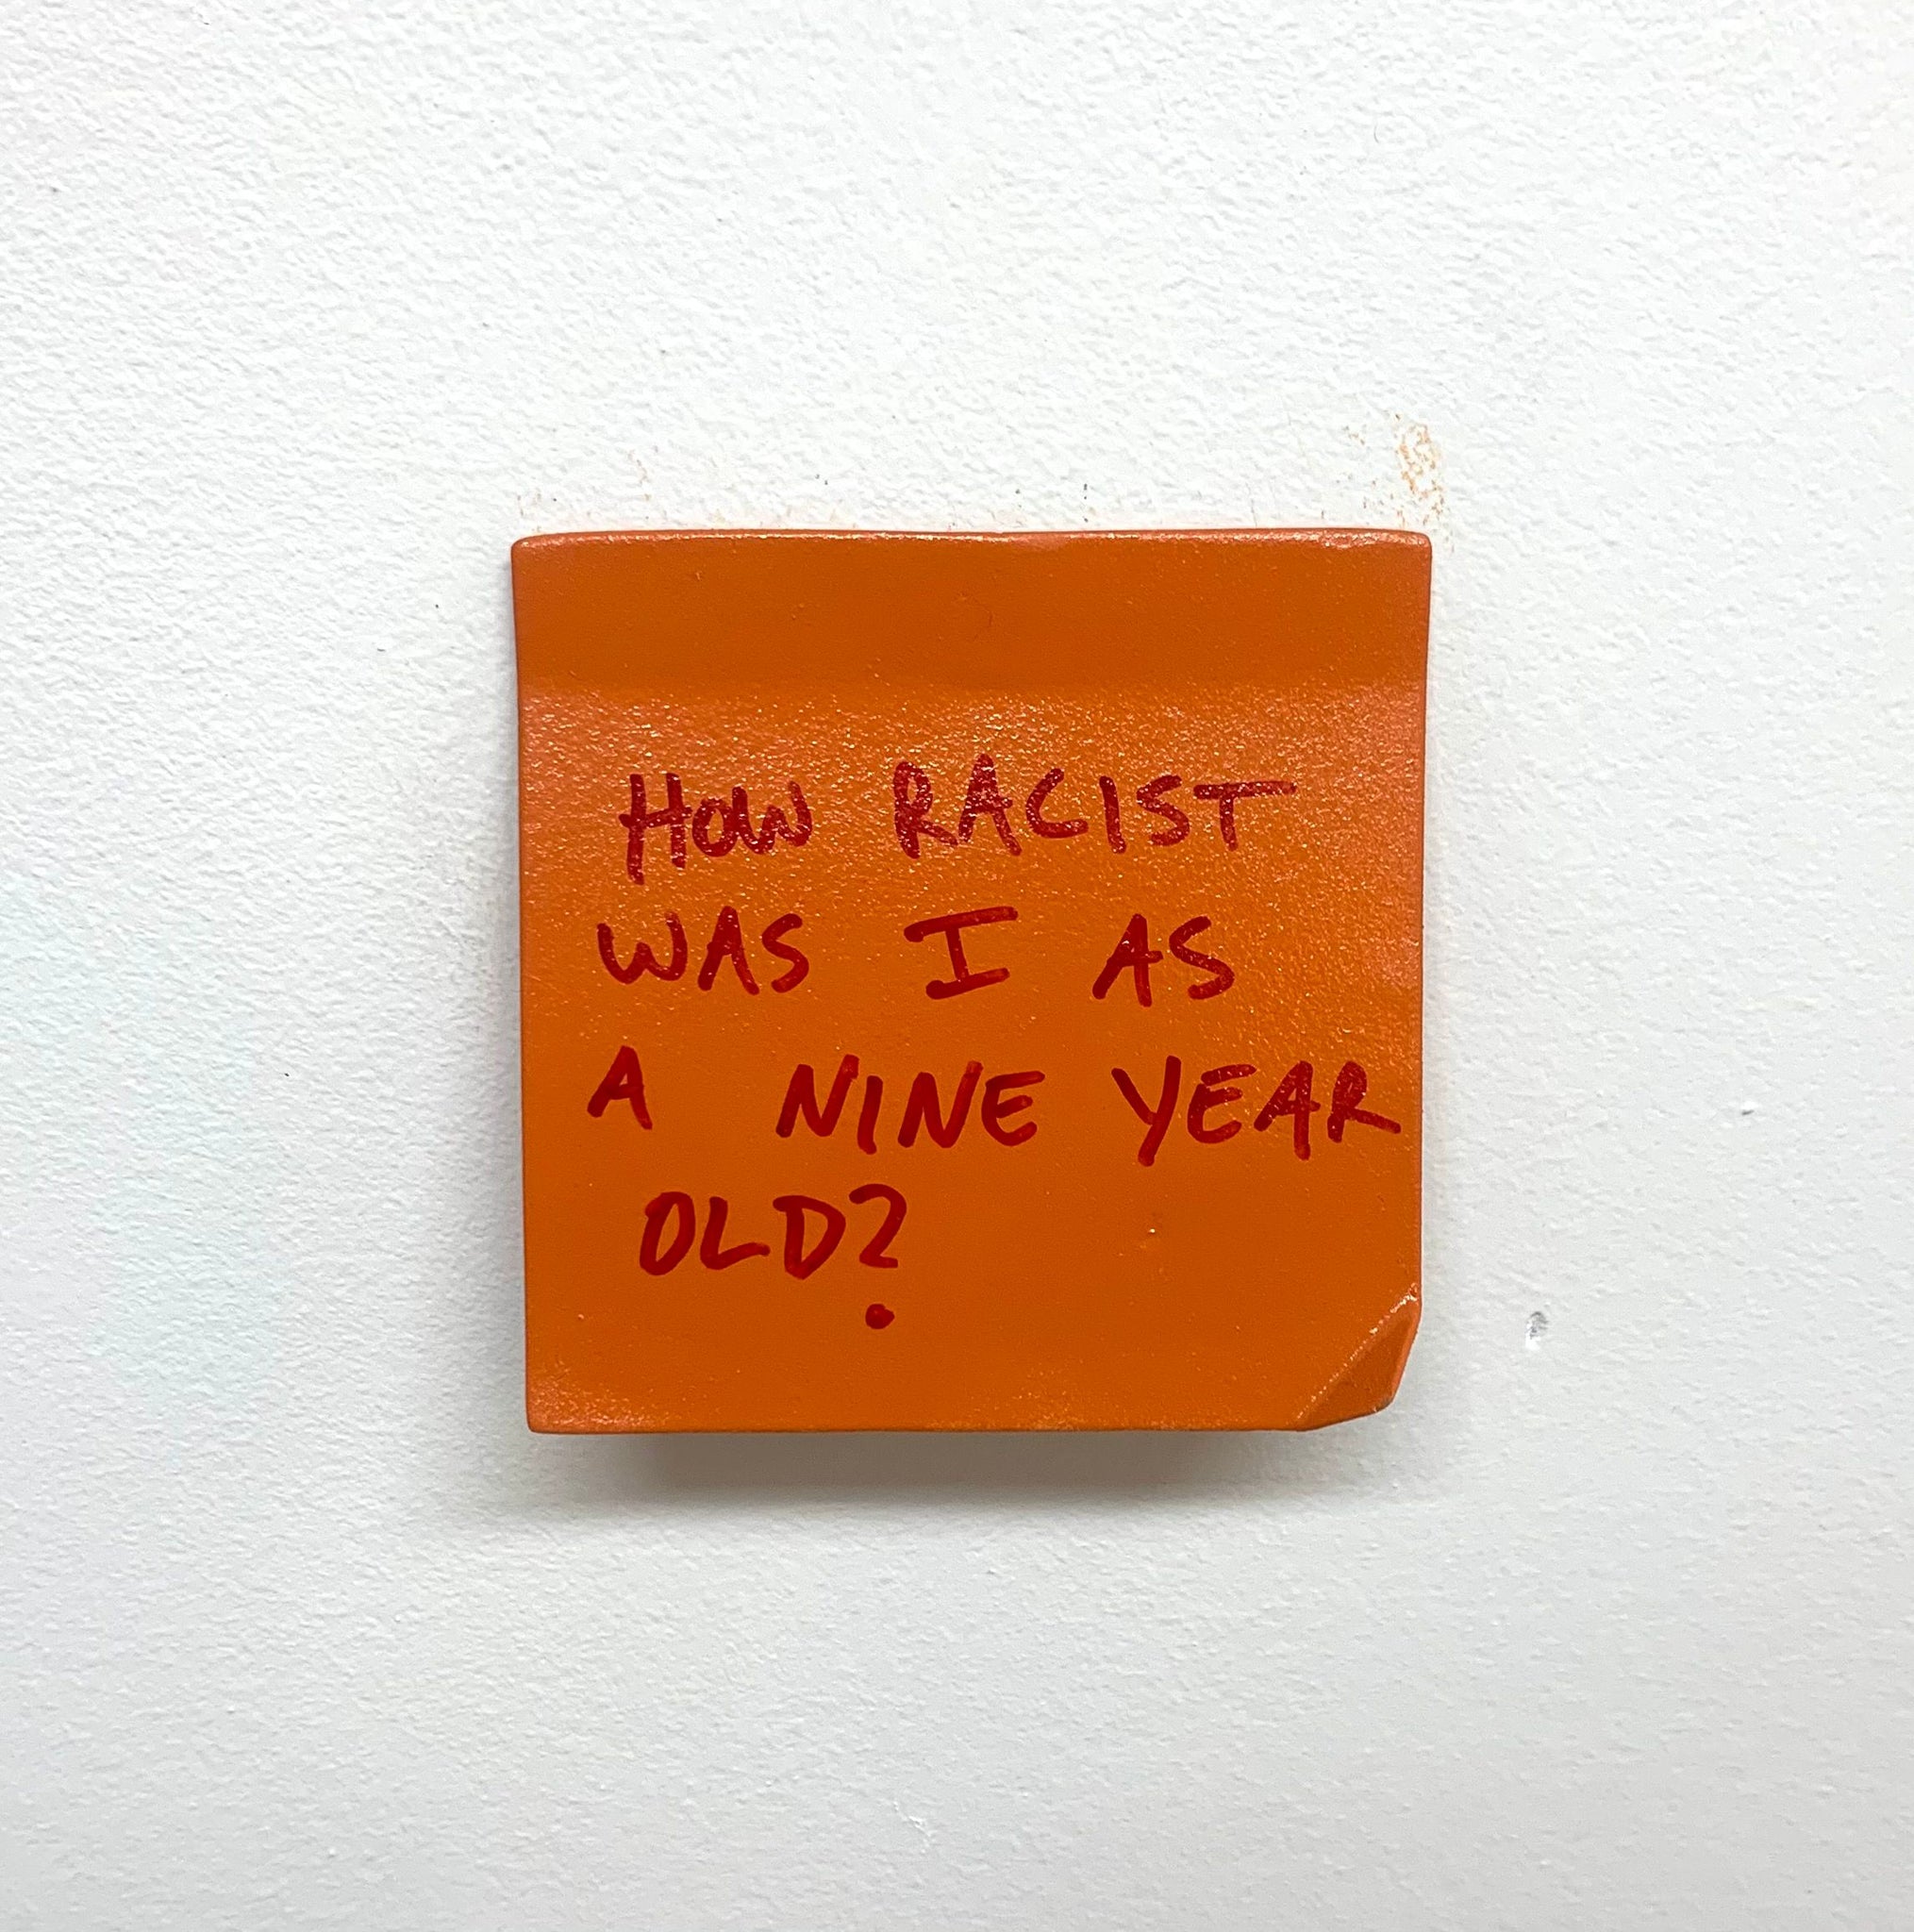 Stuart Lantry, "How racist was I as a nine year old?"